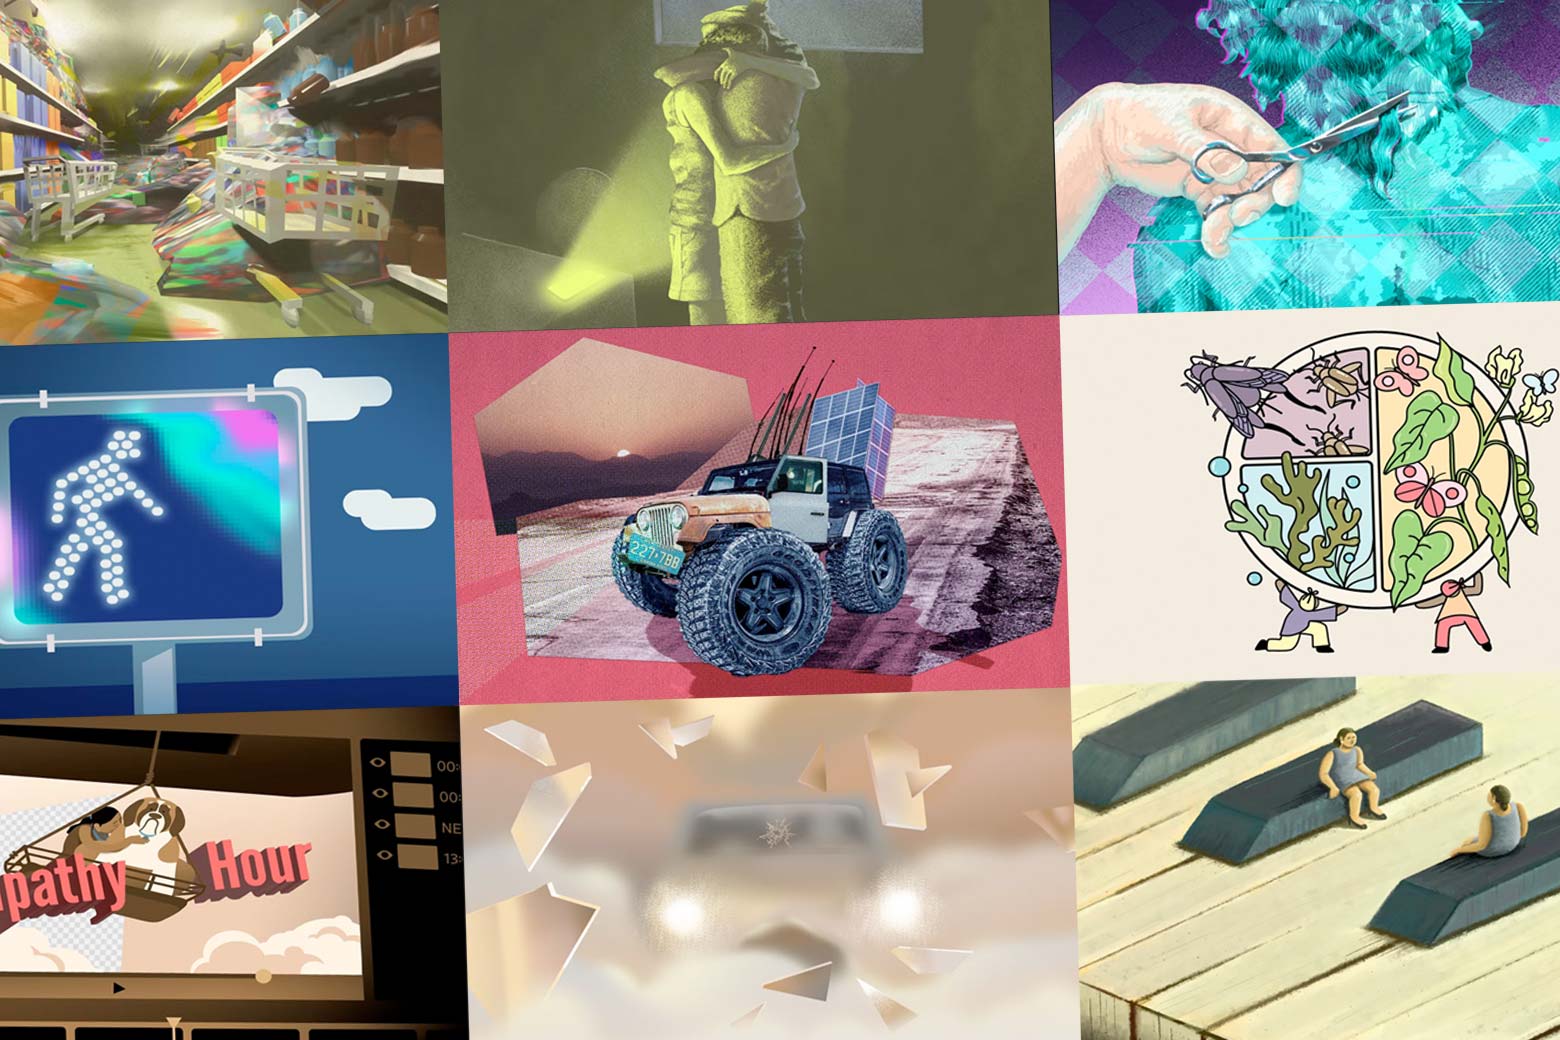 A three-by-three collage of illustrations from Future Tense Fiction stories. From left to right, a grocery store aisle, a couple embracing, the back of a head getting a haircut, a crosswalk signal, a jeep, two people holding up a planet, a TV screen that says "Empathy Hour," shattered glass with car headlights in the background, and two people seated on piano keys.